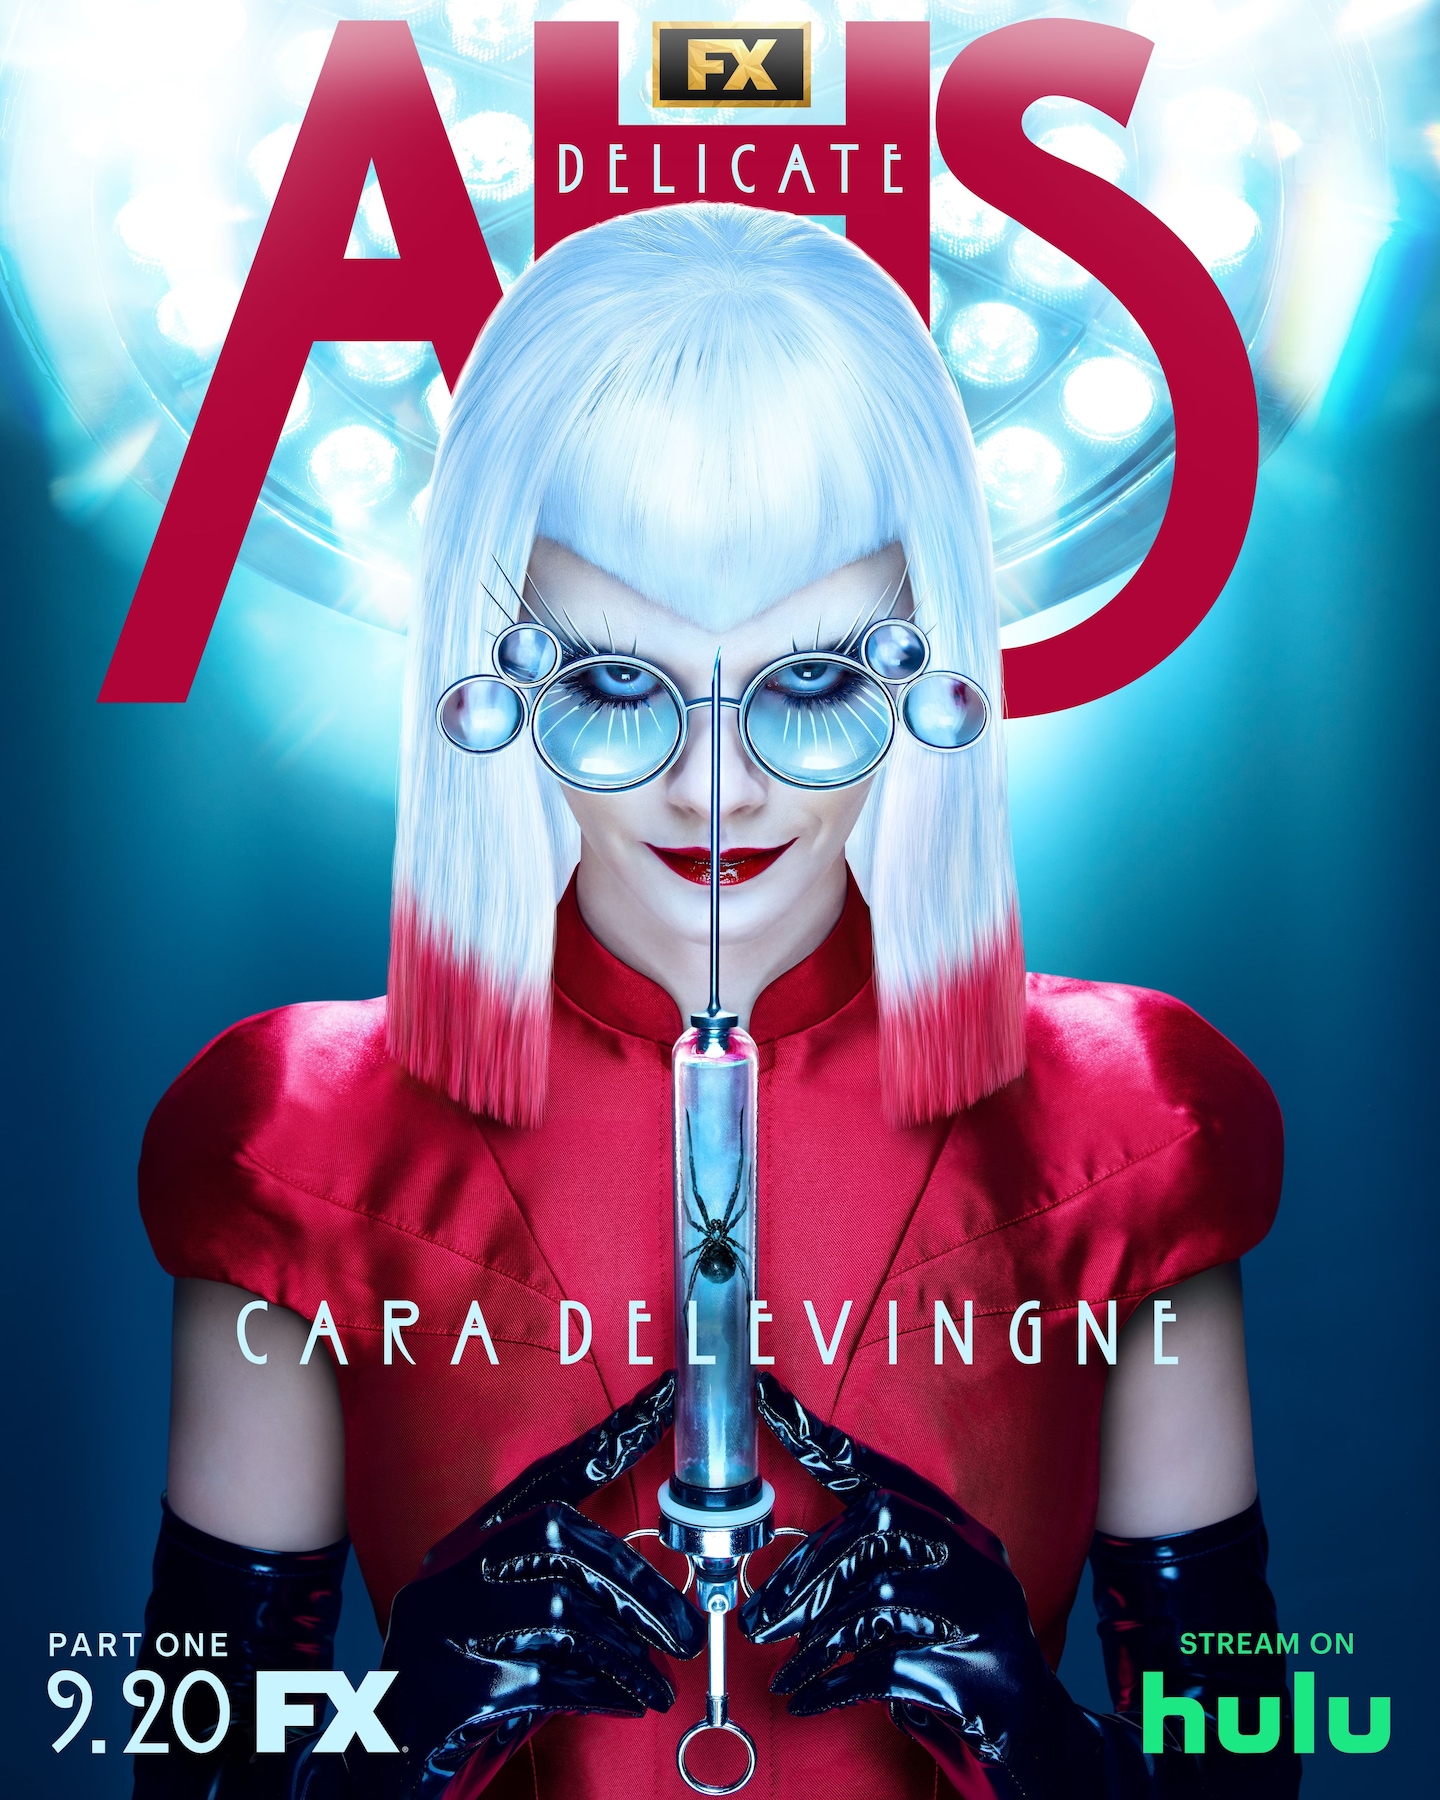 A Woman with white hair wearing a red top, gloves and multifocal glasses, holding a needle with a spider for AHS: Delicate